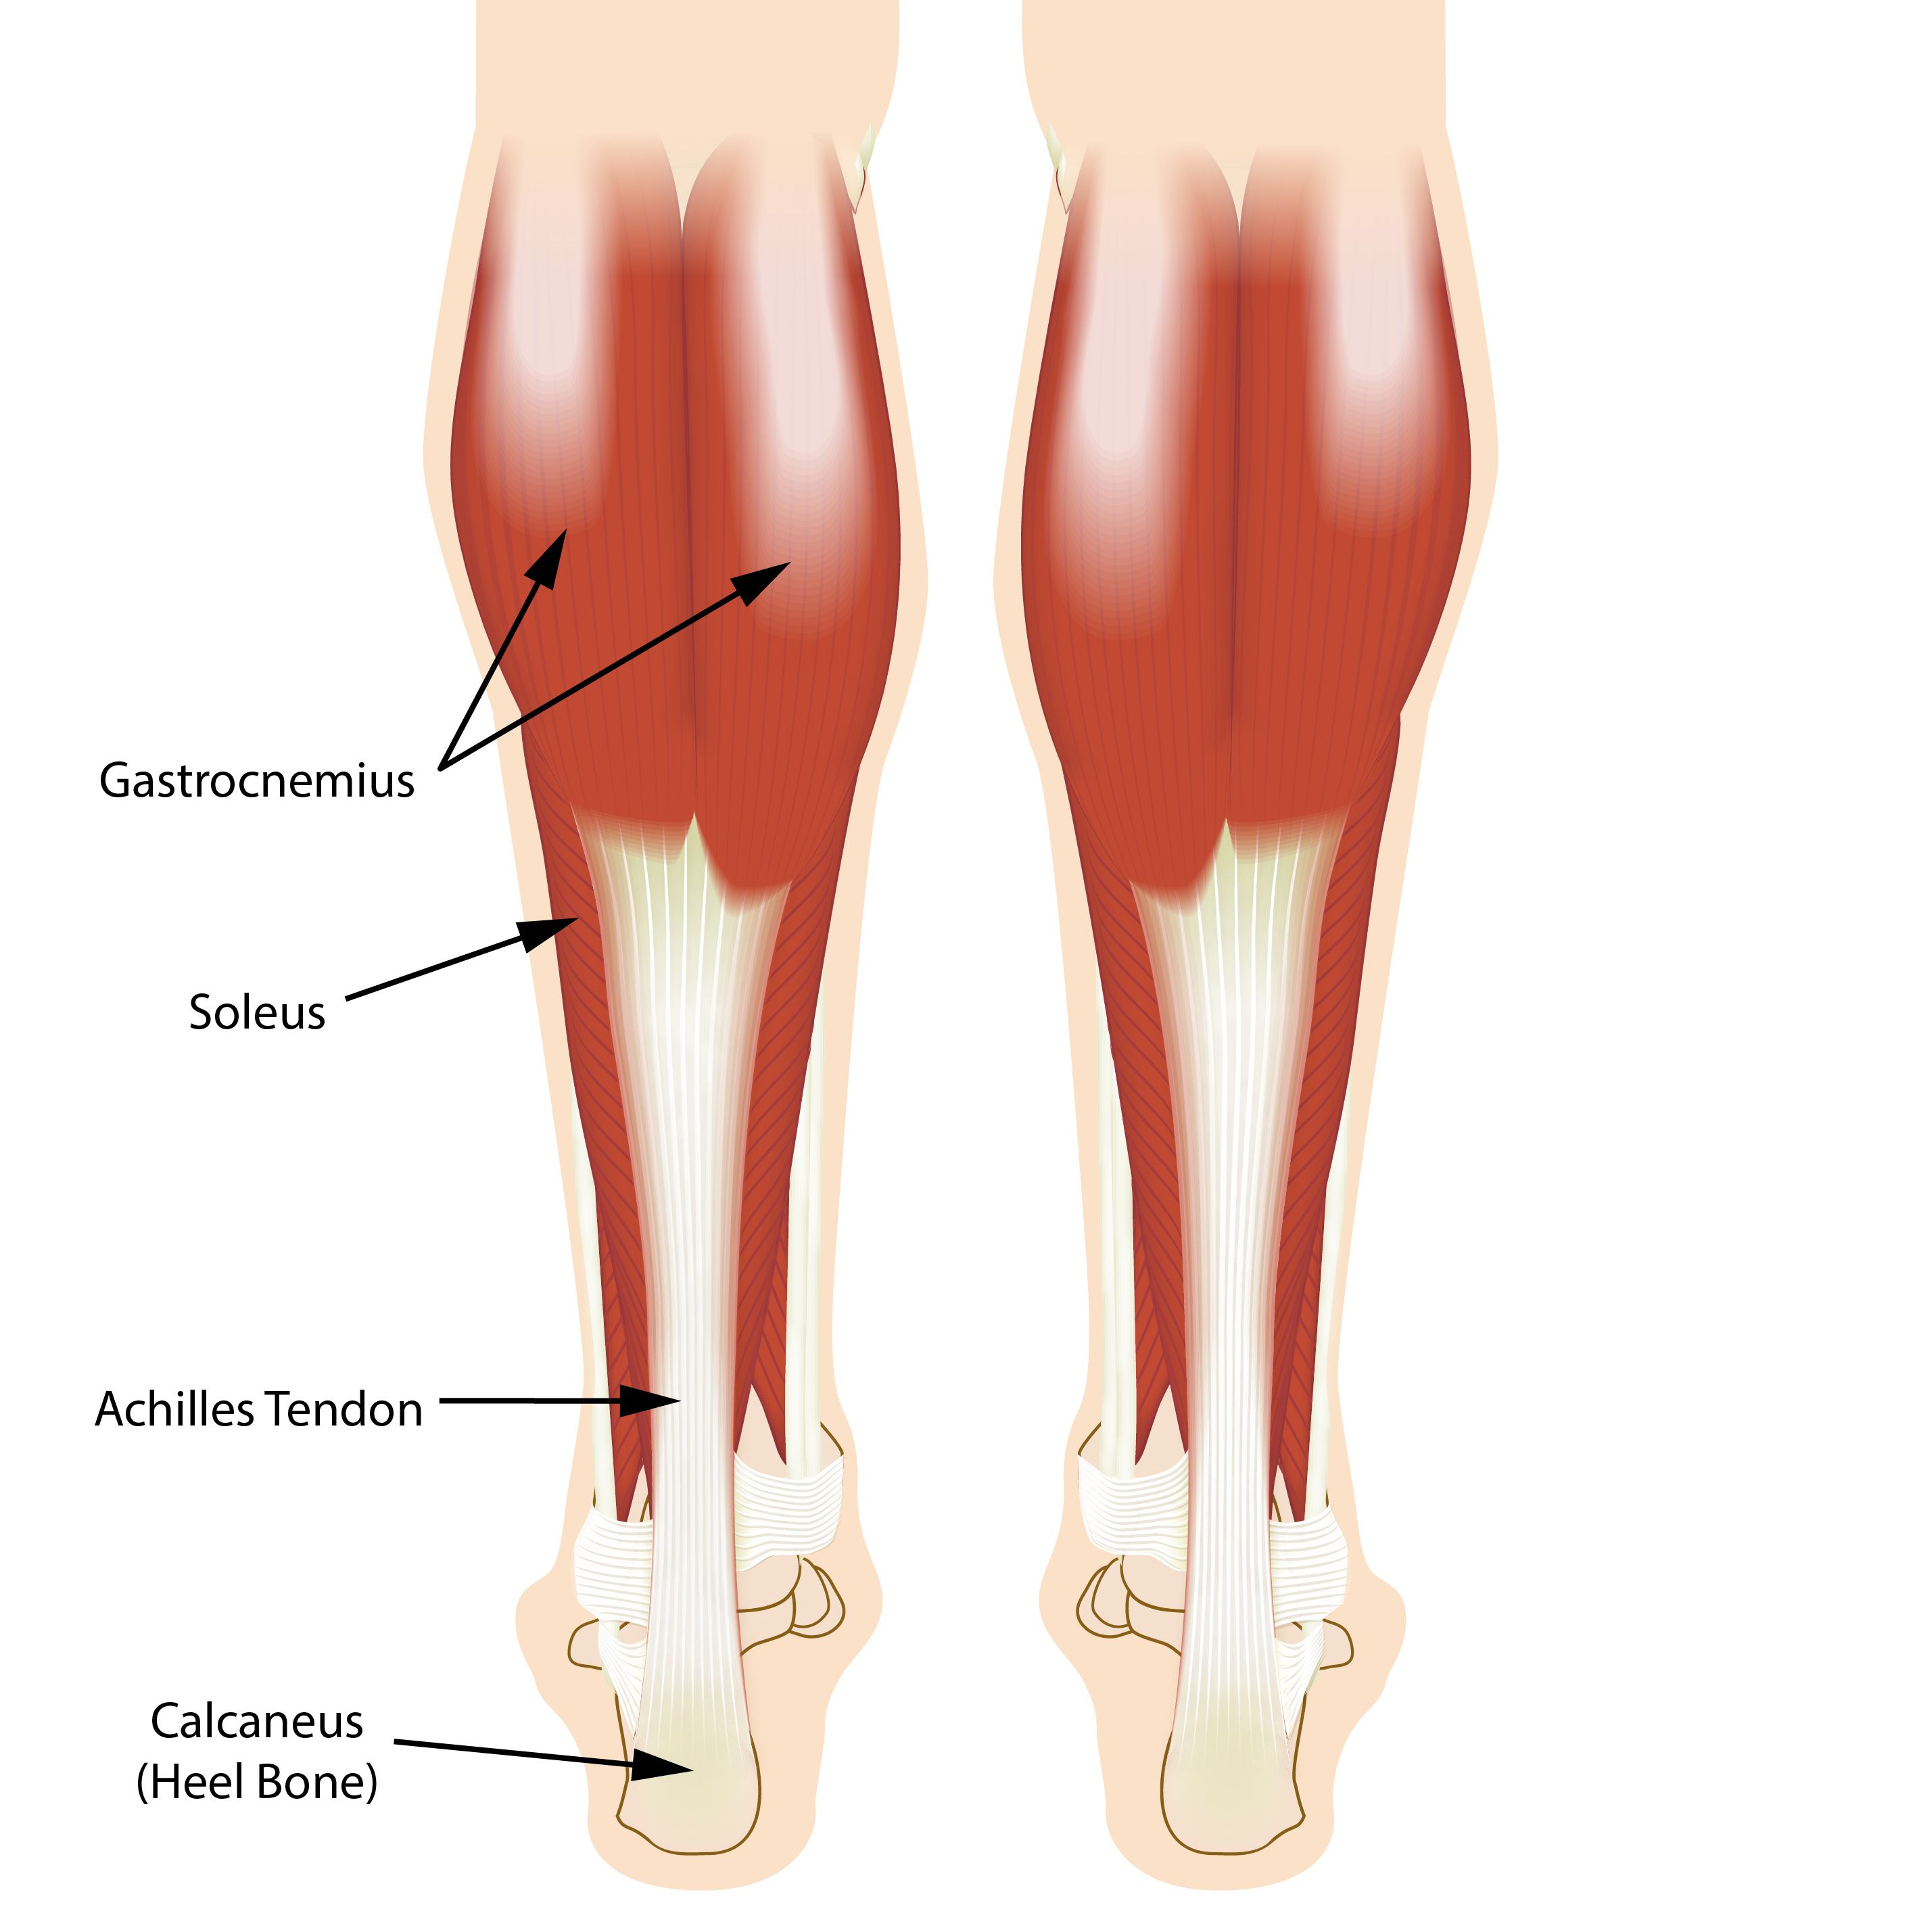 Anatomy of the calf, including muscles and Achilles tendon